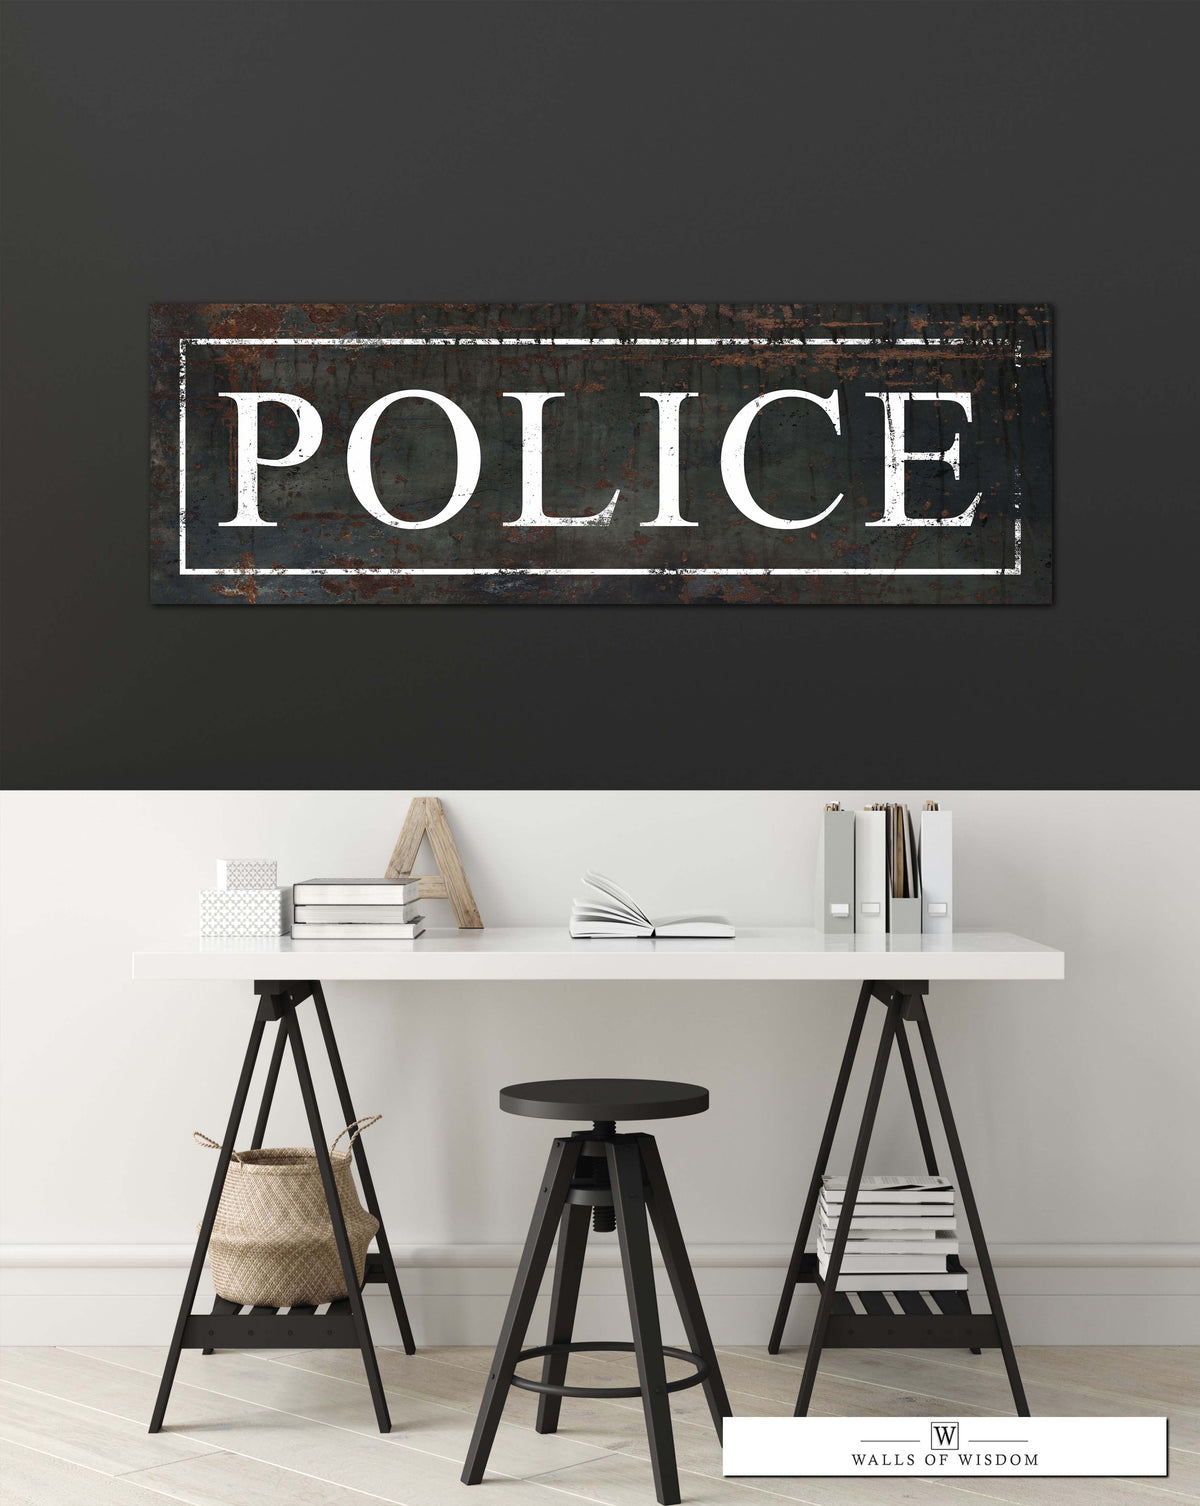 Vintage Police Wall Art - My Policeman Retired Police Officer Canvas Sign